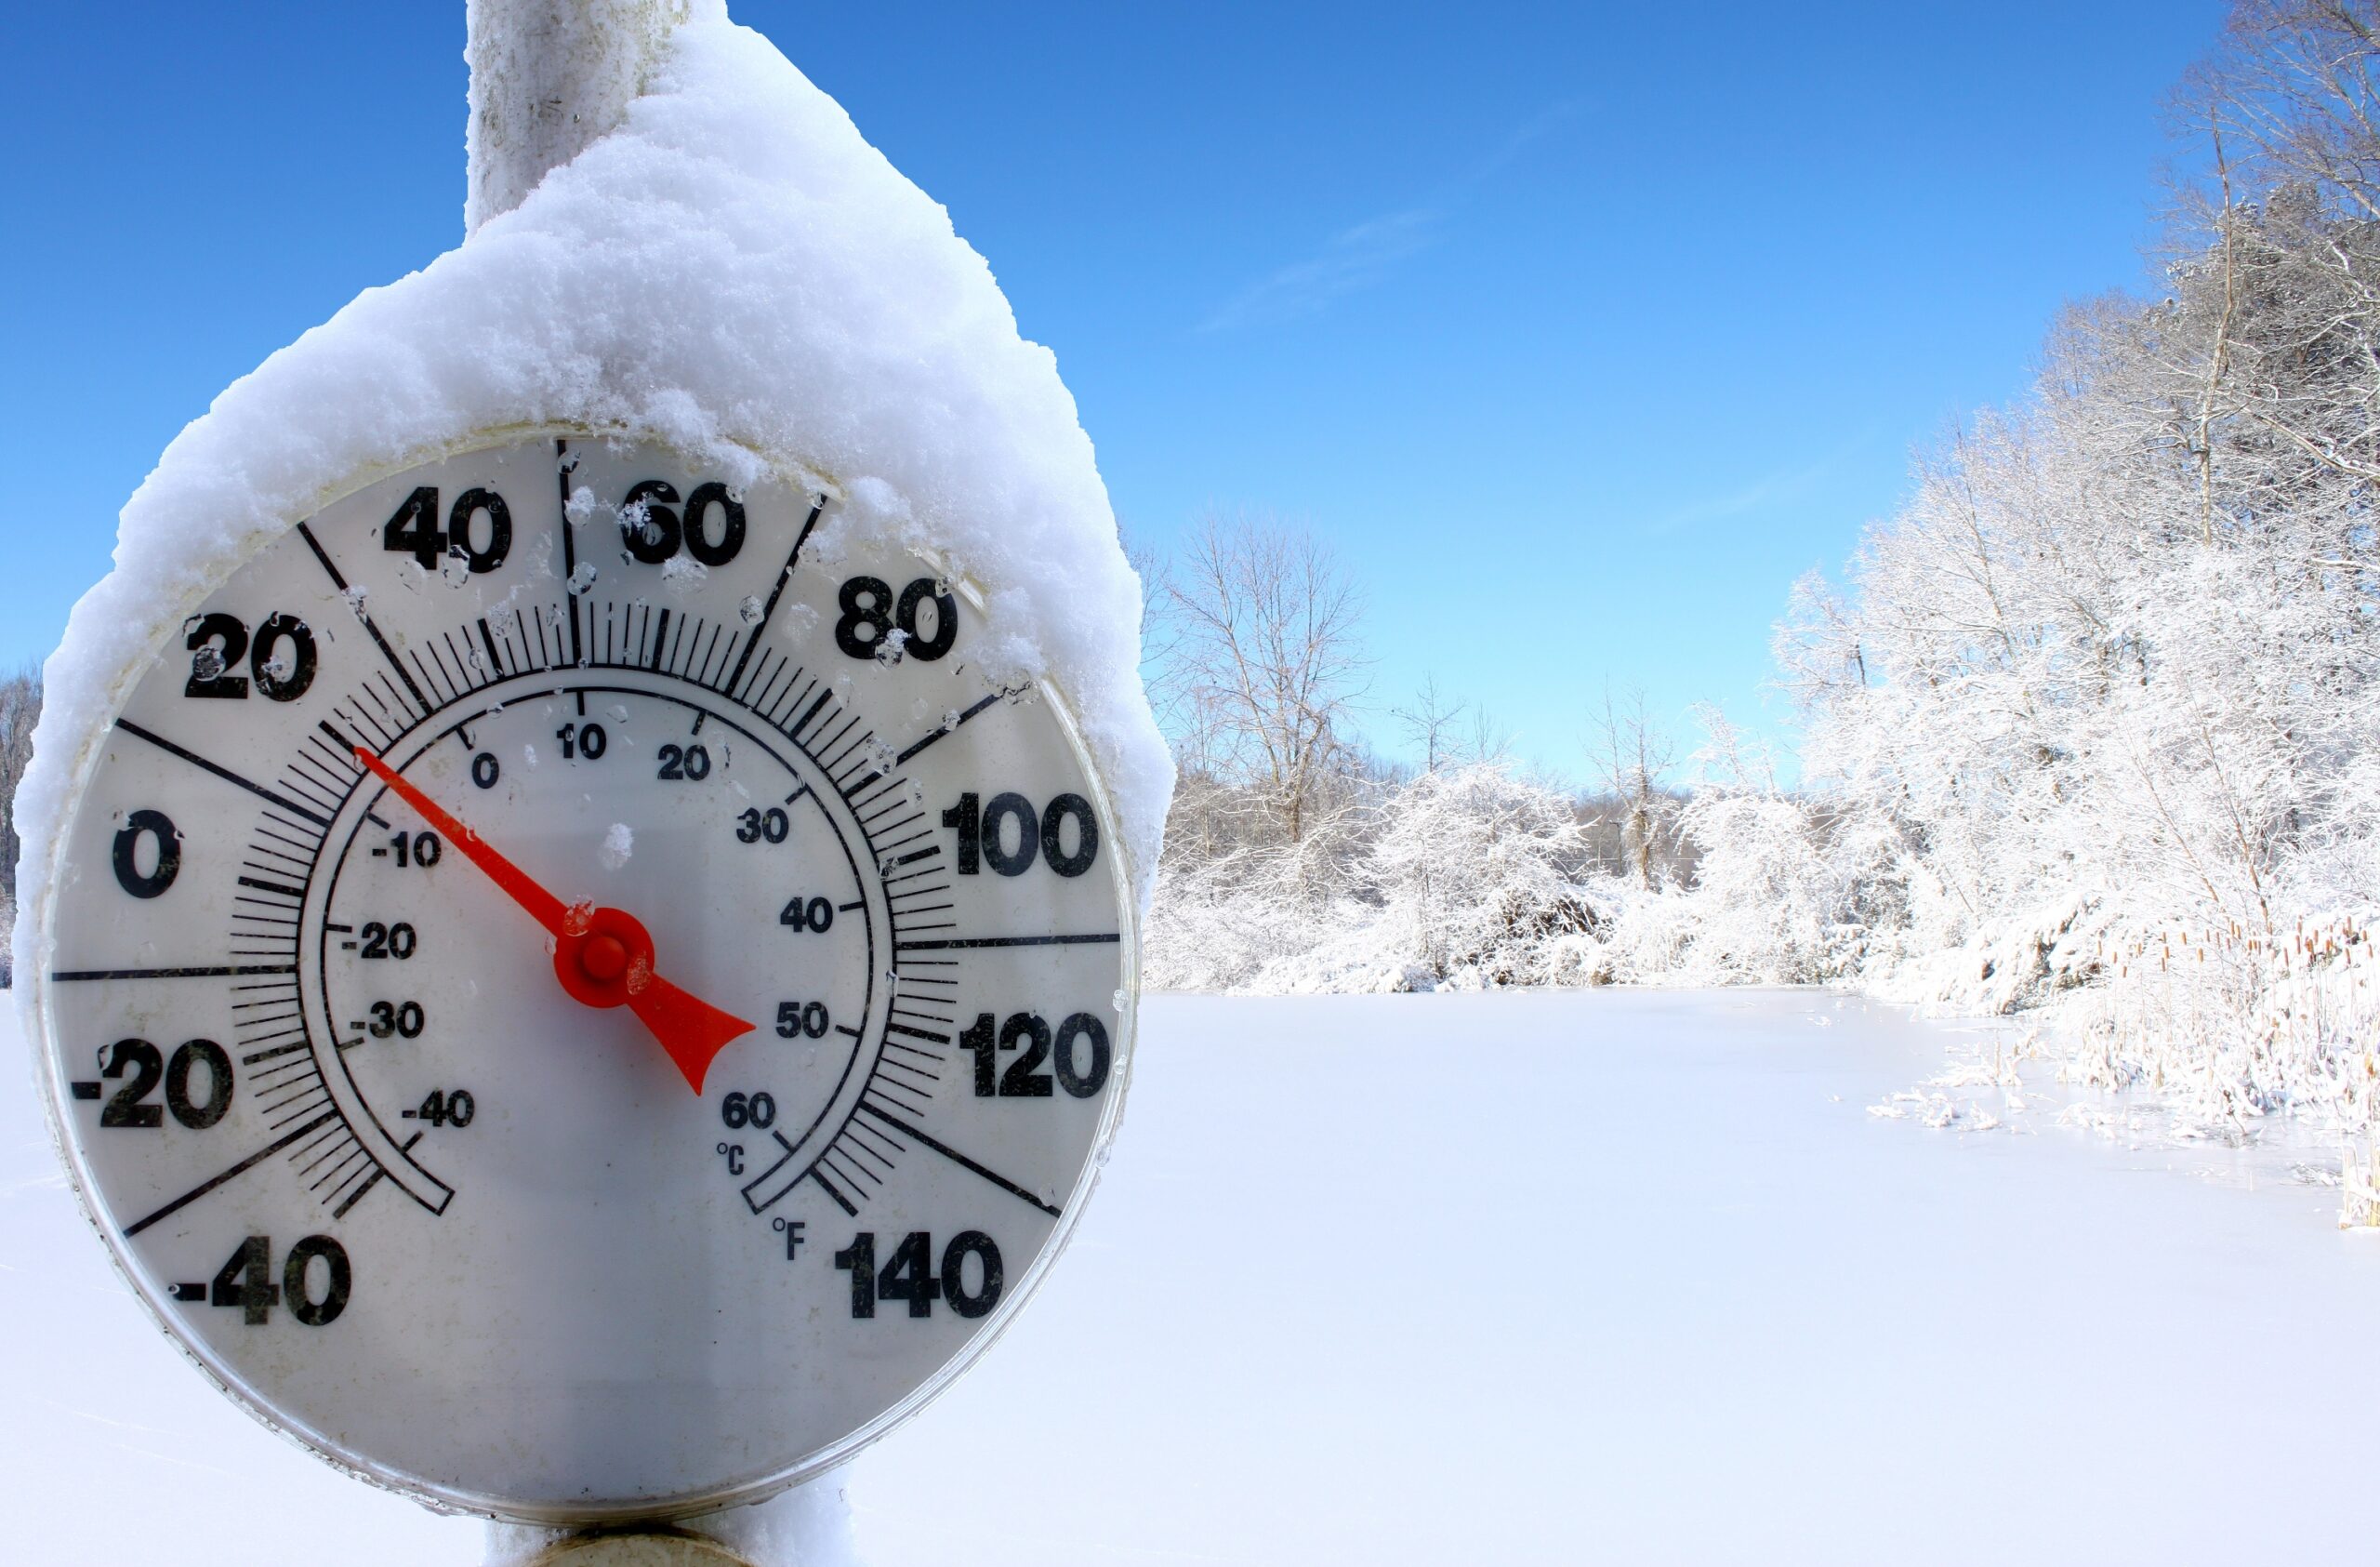 People, Pets, Pipes - Staying safe in extreme cold weather - The